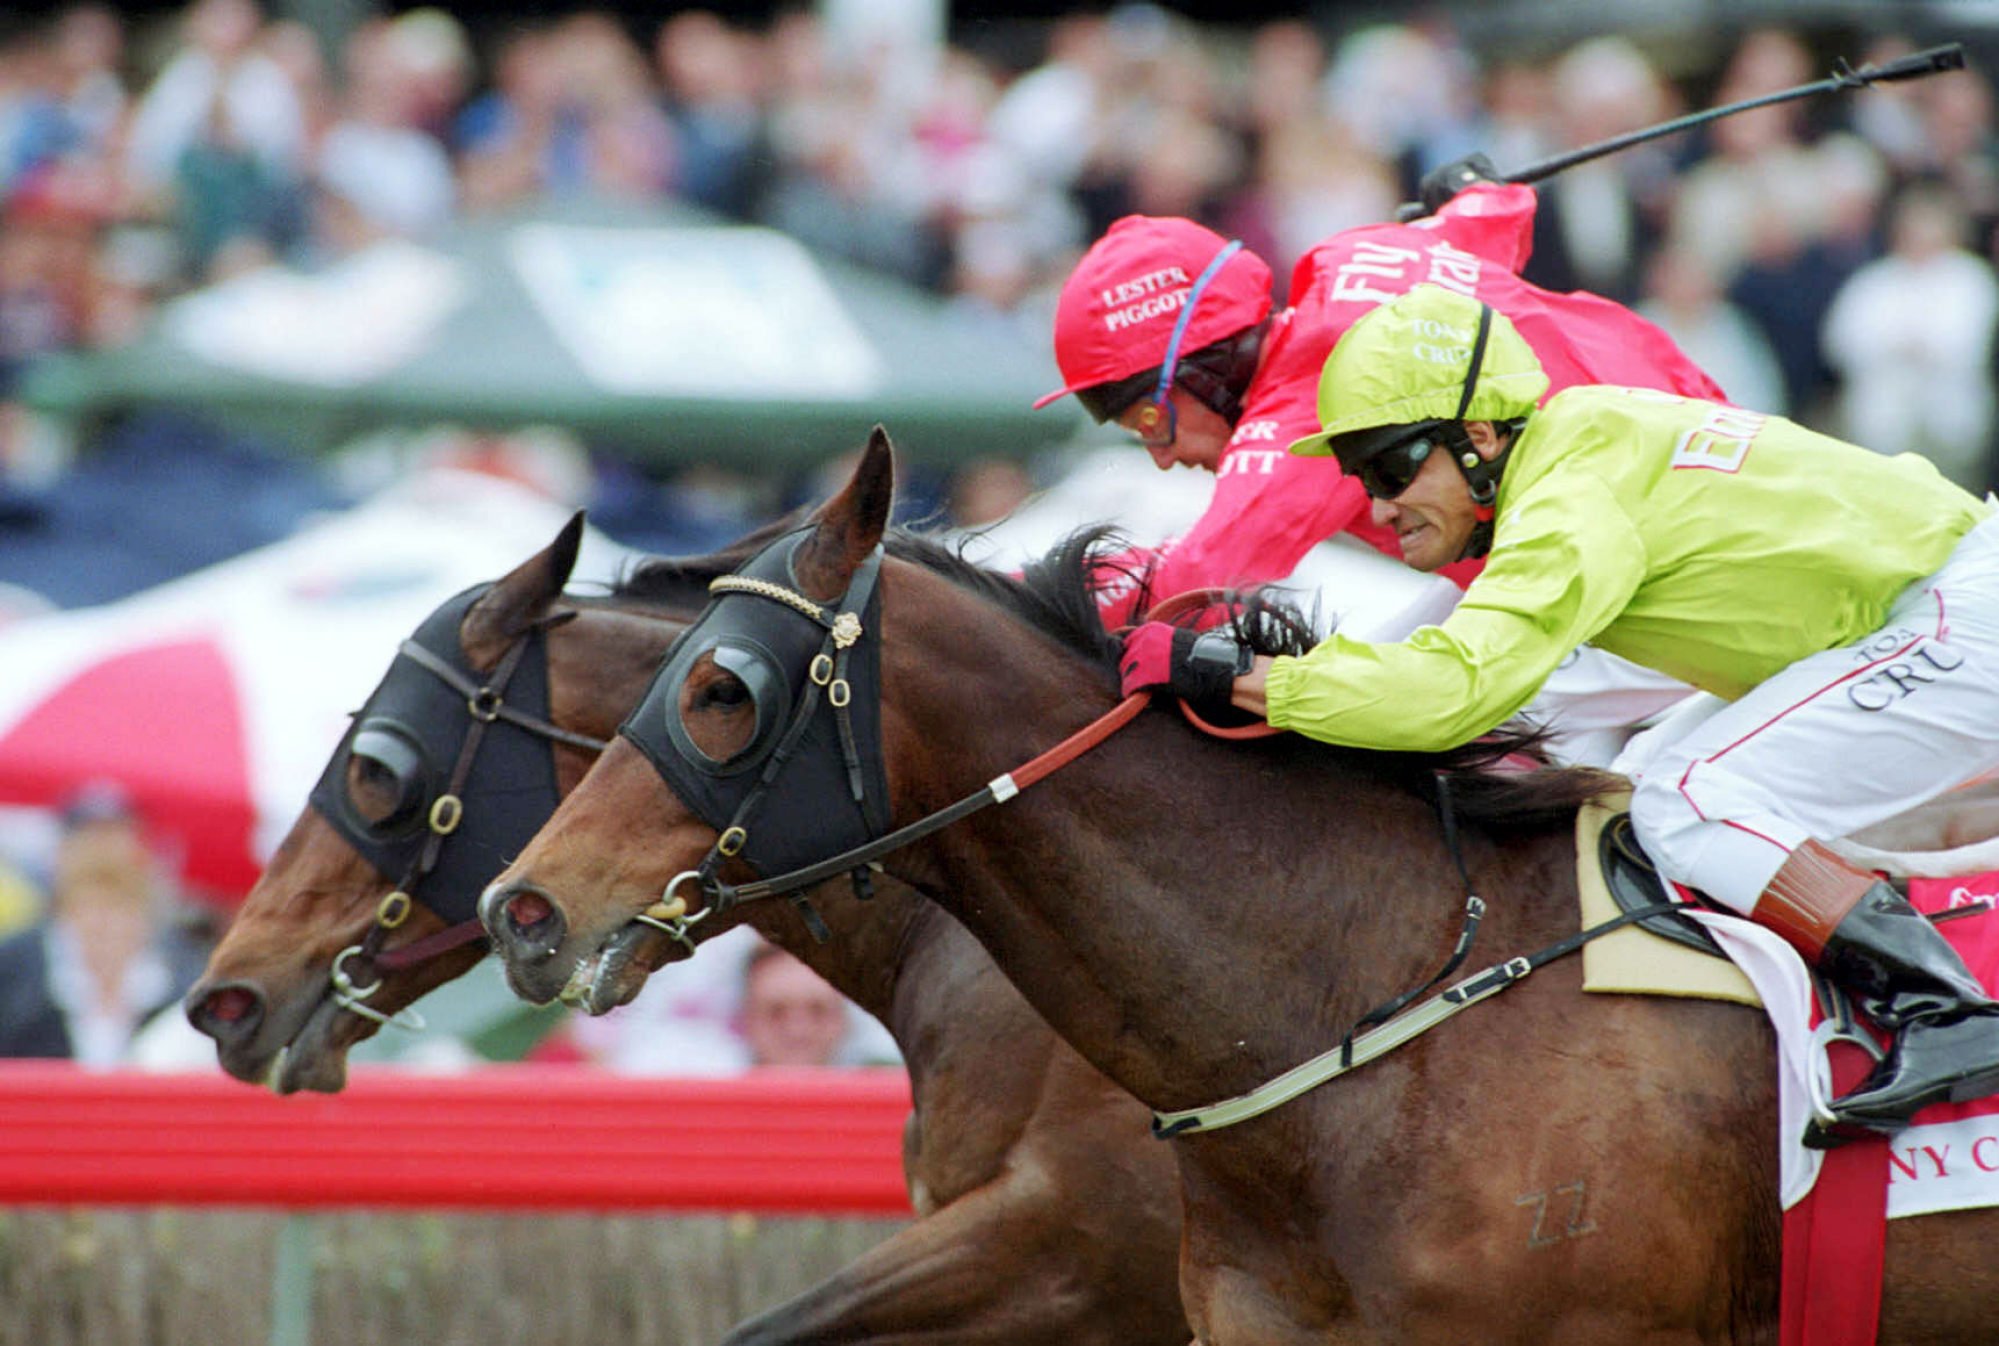 Tony Cruz (light green) and Lester Piggott fight out the finish of a legends’ race at Flemington in Melbourne in 2001. Photo: Herald Sun